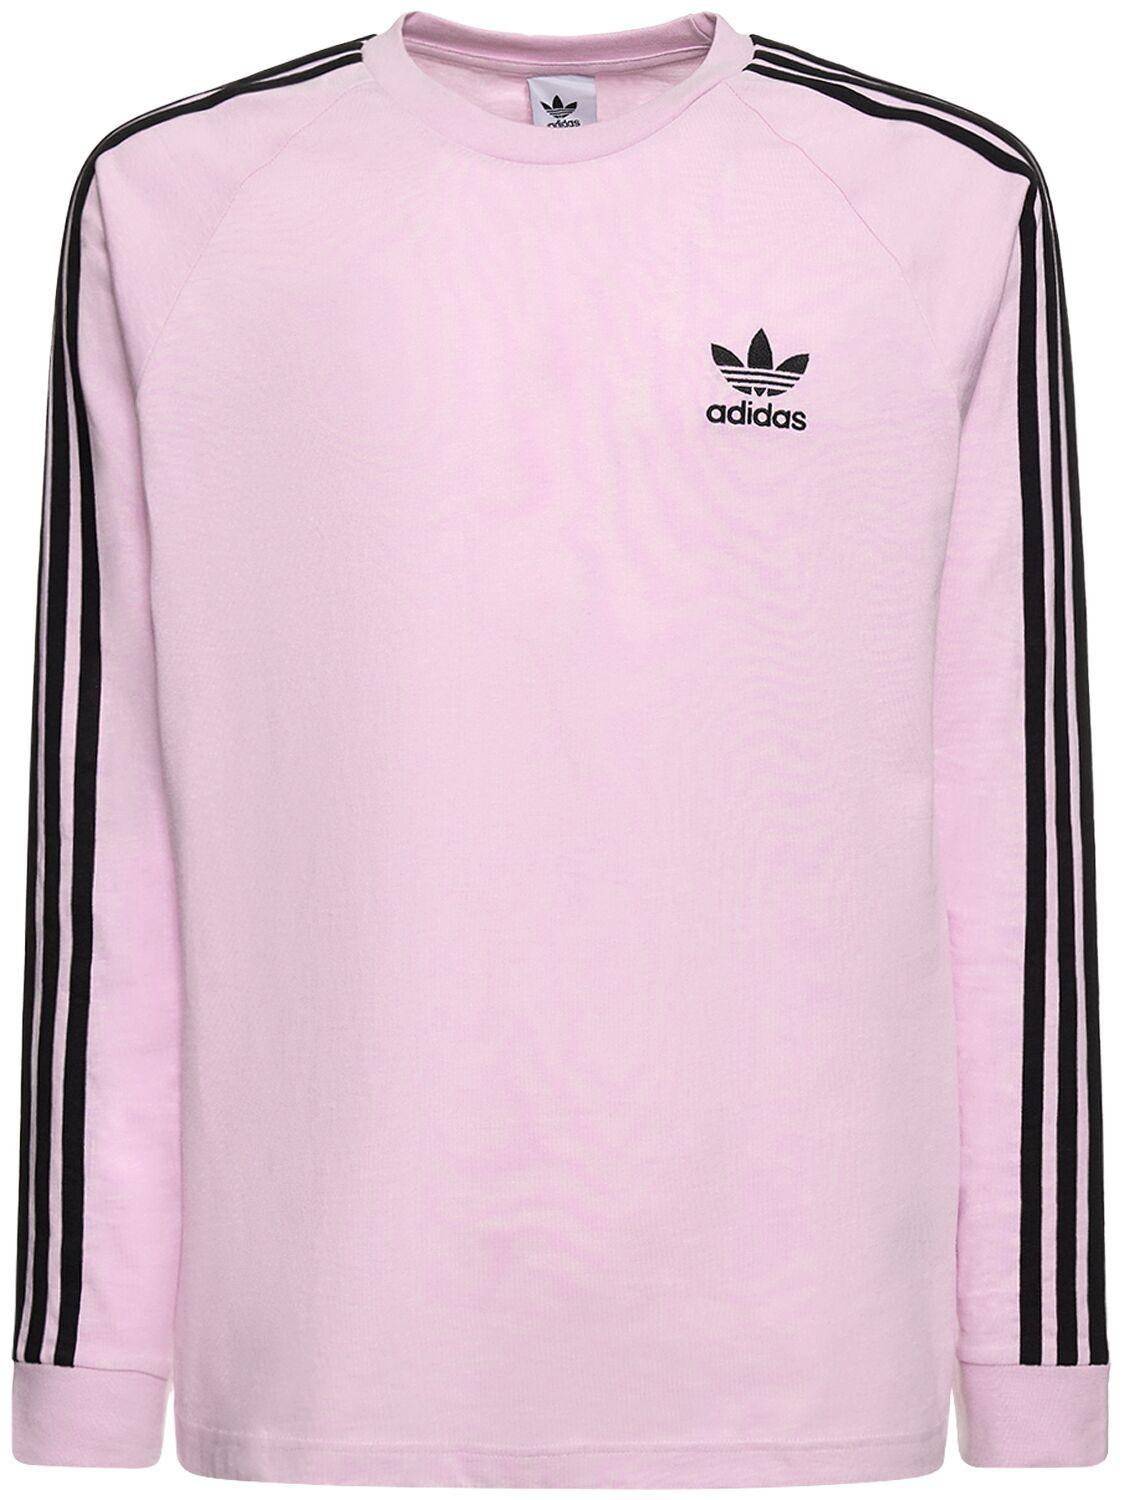 adidas Originals 3-stripes Cotton Long Sleeve T-shirt in Pink for Men | Lyst